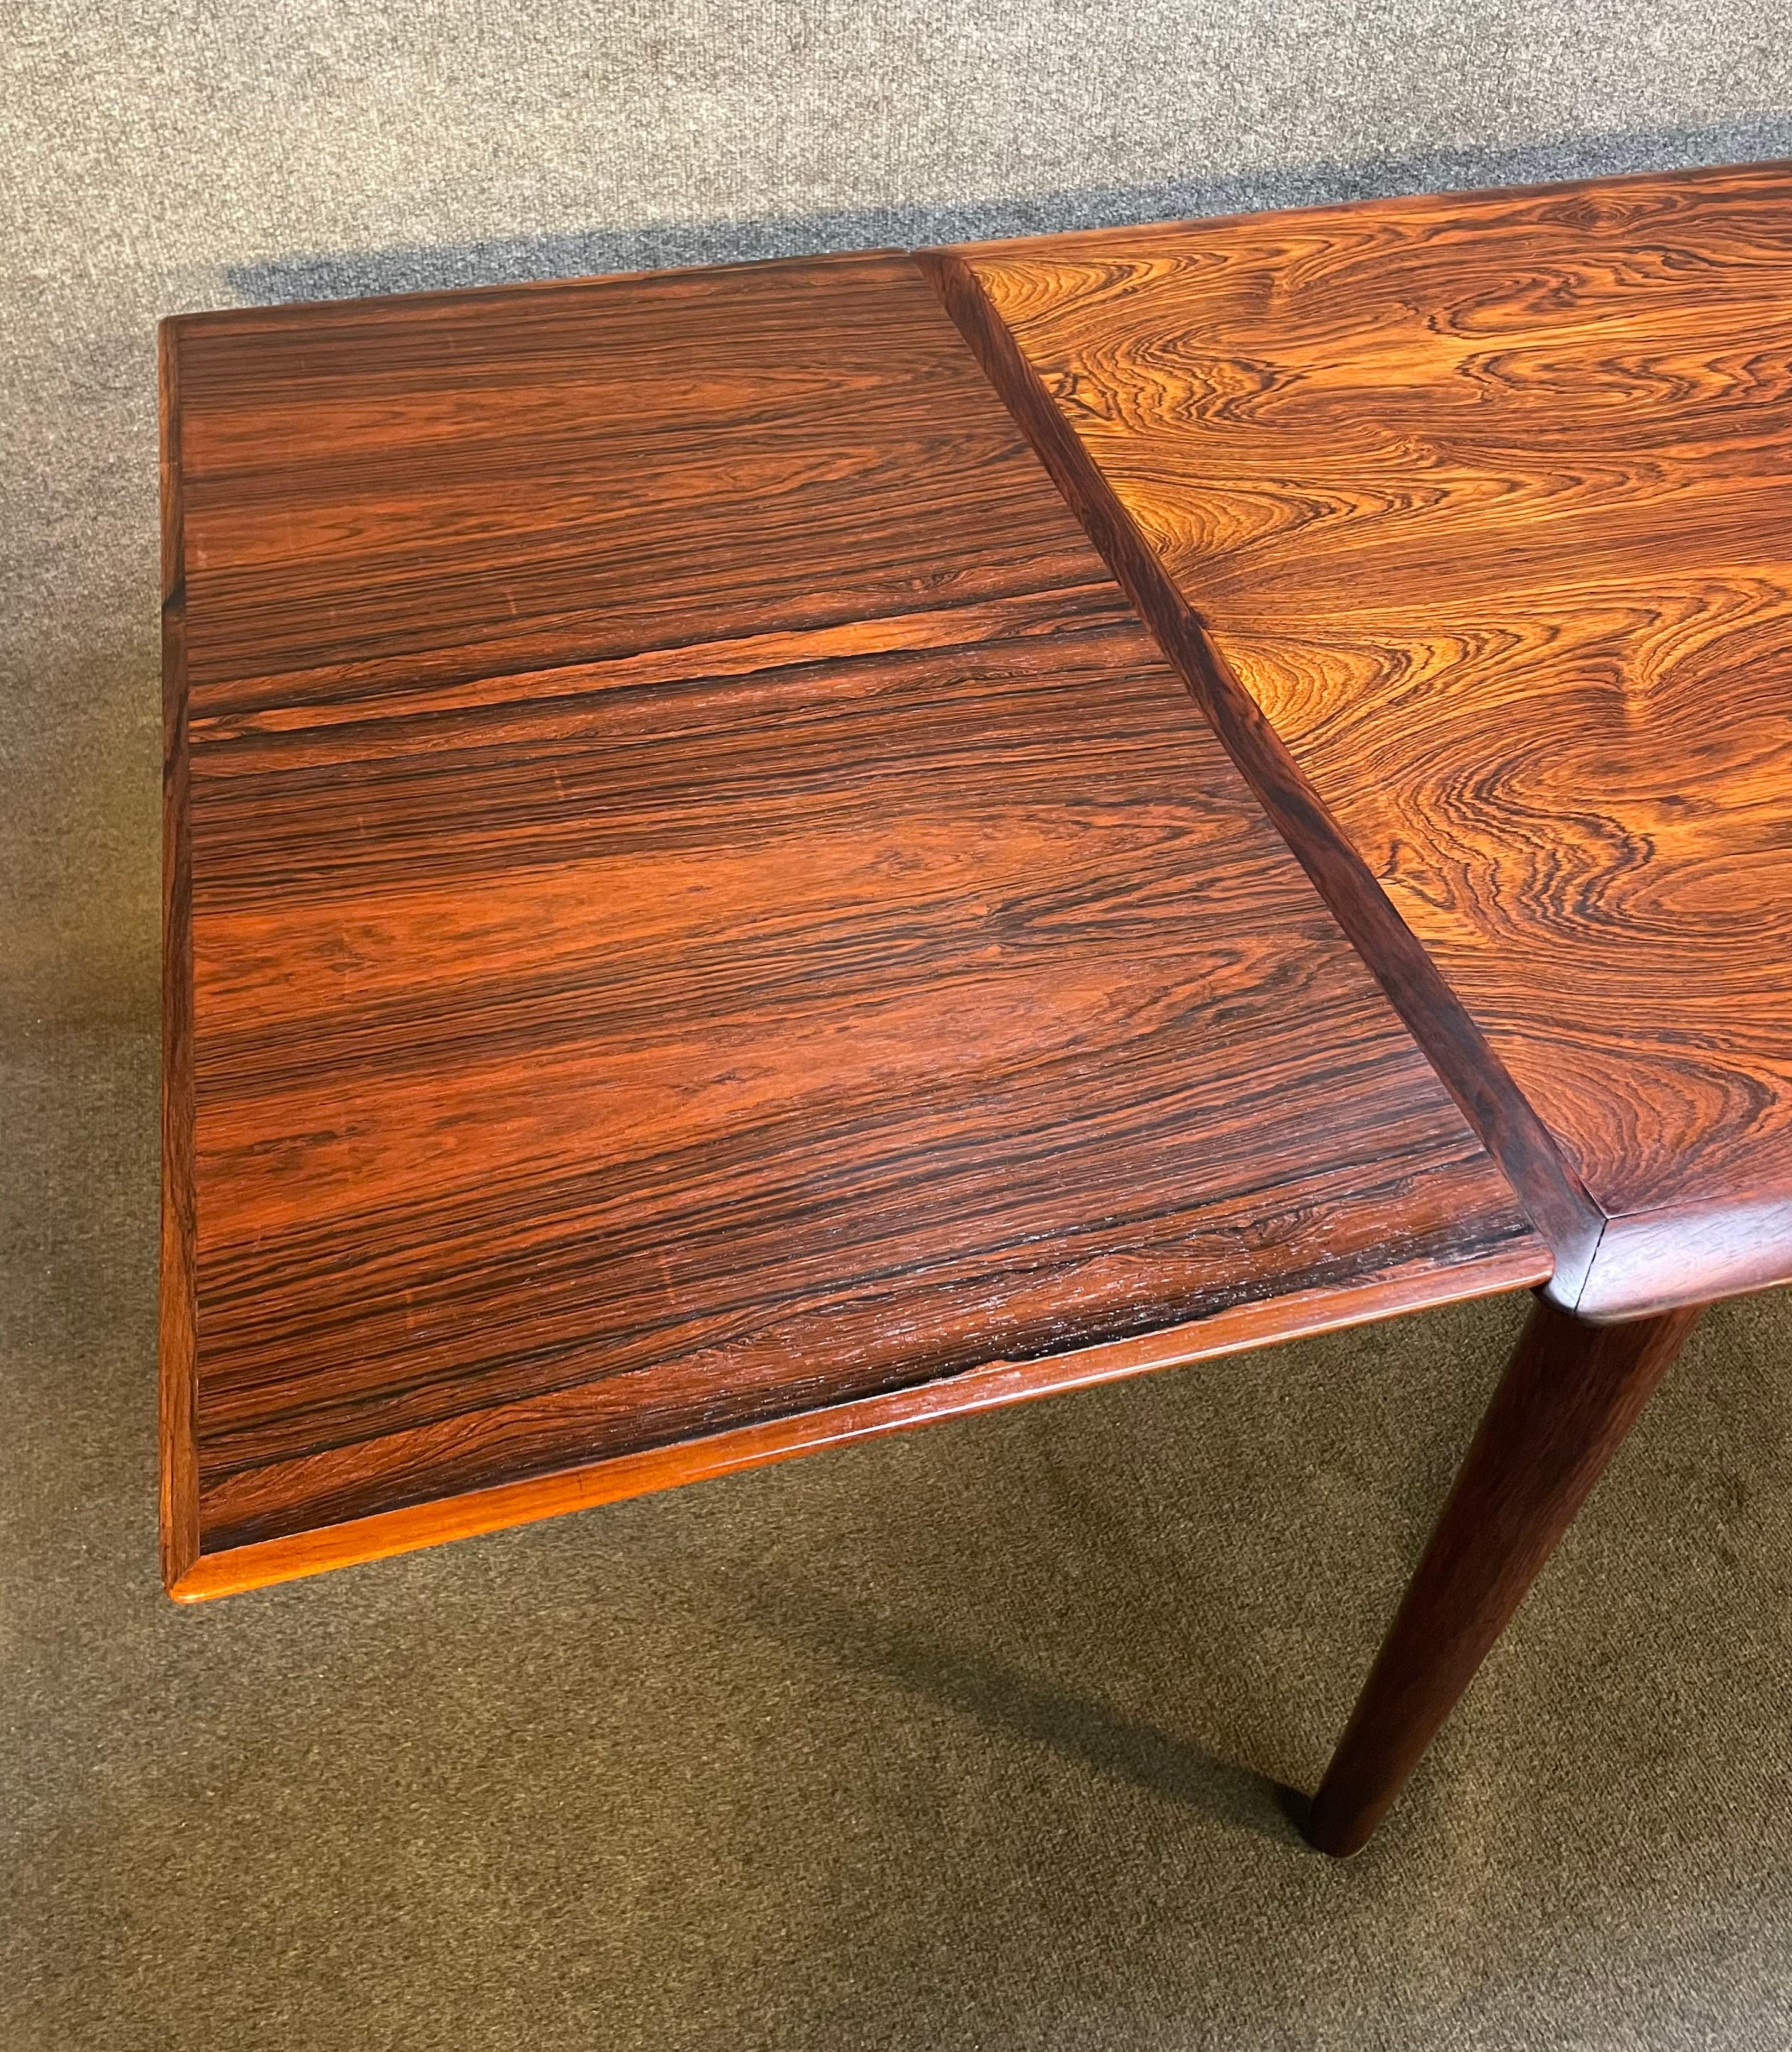 Here is a beautiful scandinavian modern dining table in rosewood manufactured in Denmark in the 1960's.
This superb table, recently imported from Europe to California before its refinishing, features amazing wood grain details, two draw leaves and